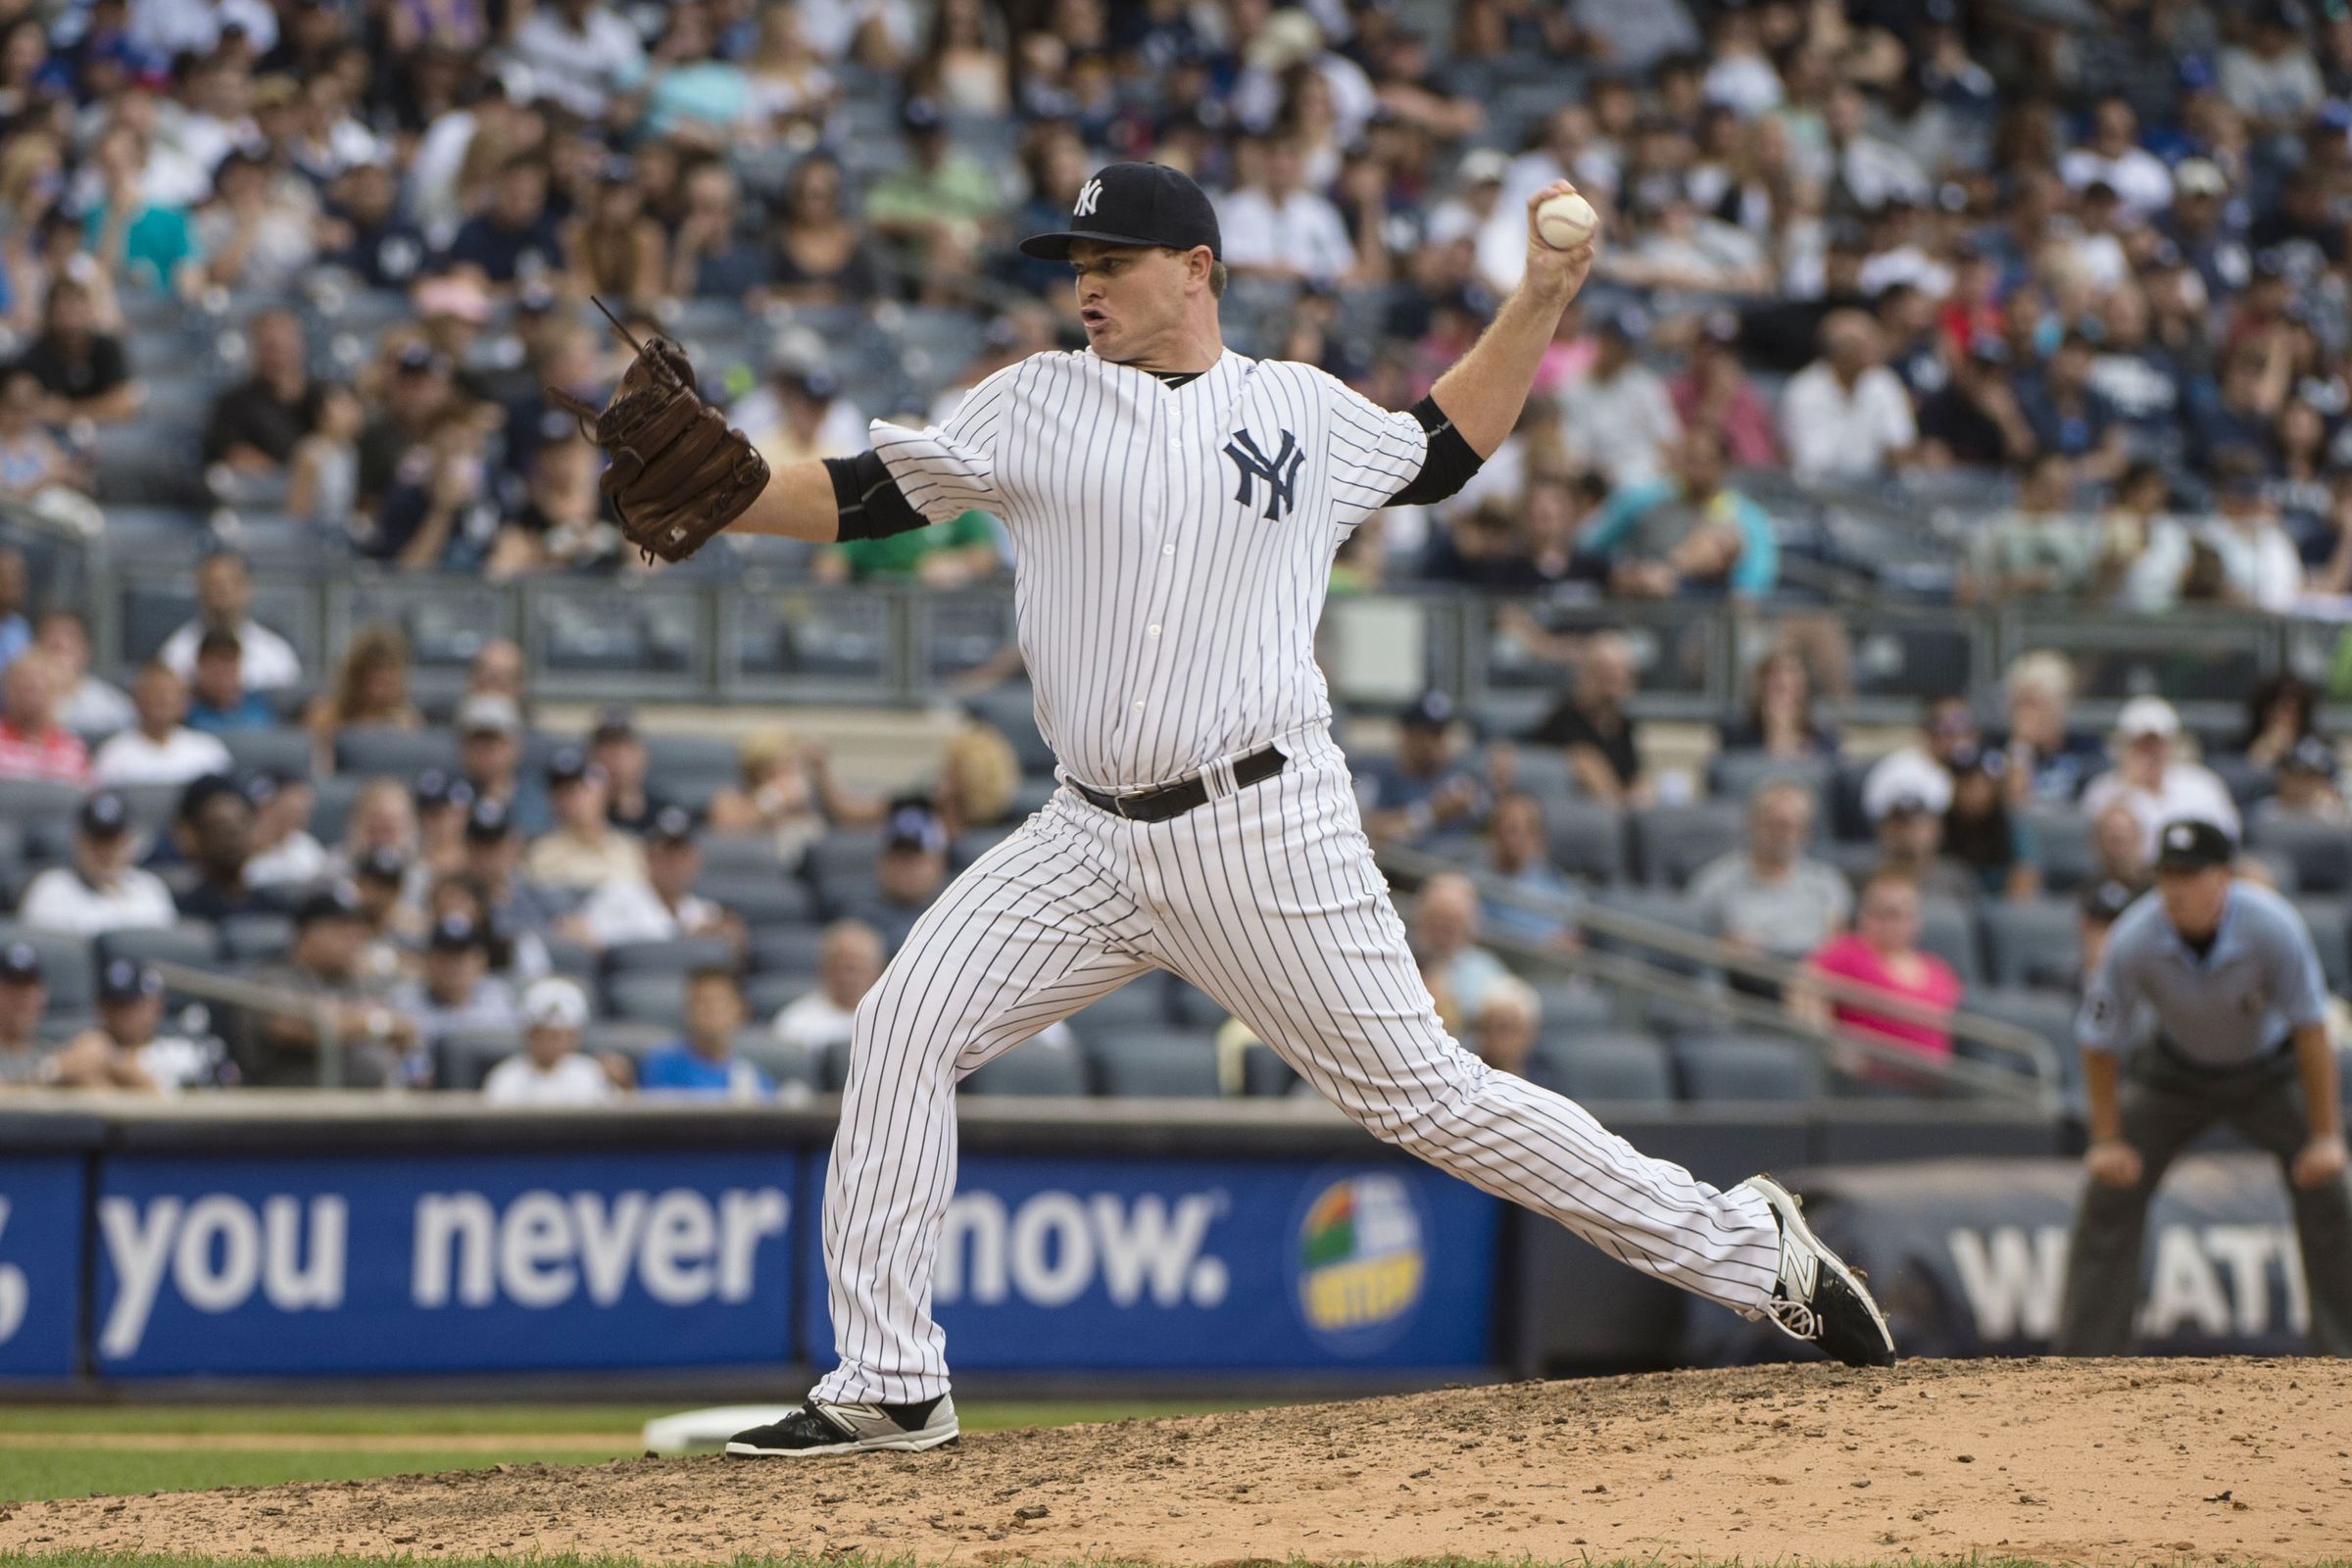 The New York Yankees have traded lefty reliever Justin Wilson to the Detroit Tigers over pitchers Luis Cessa and Chad Green. The power lefty player is expected to do some reinforcements for the Tigers.